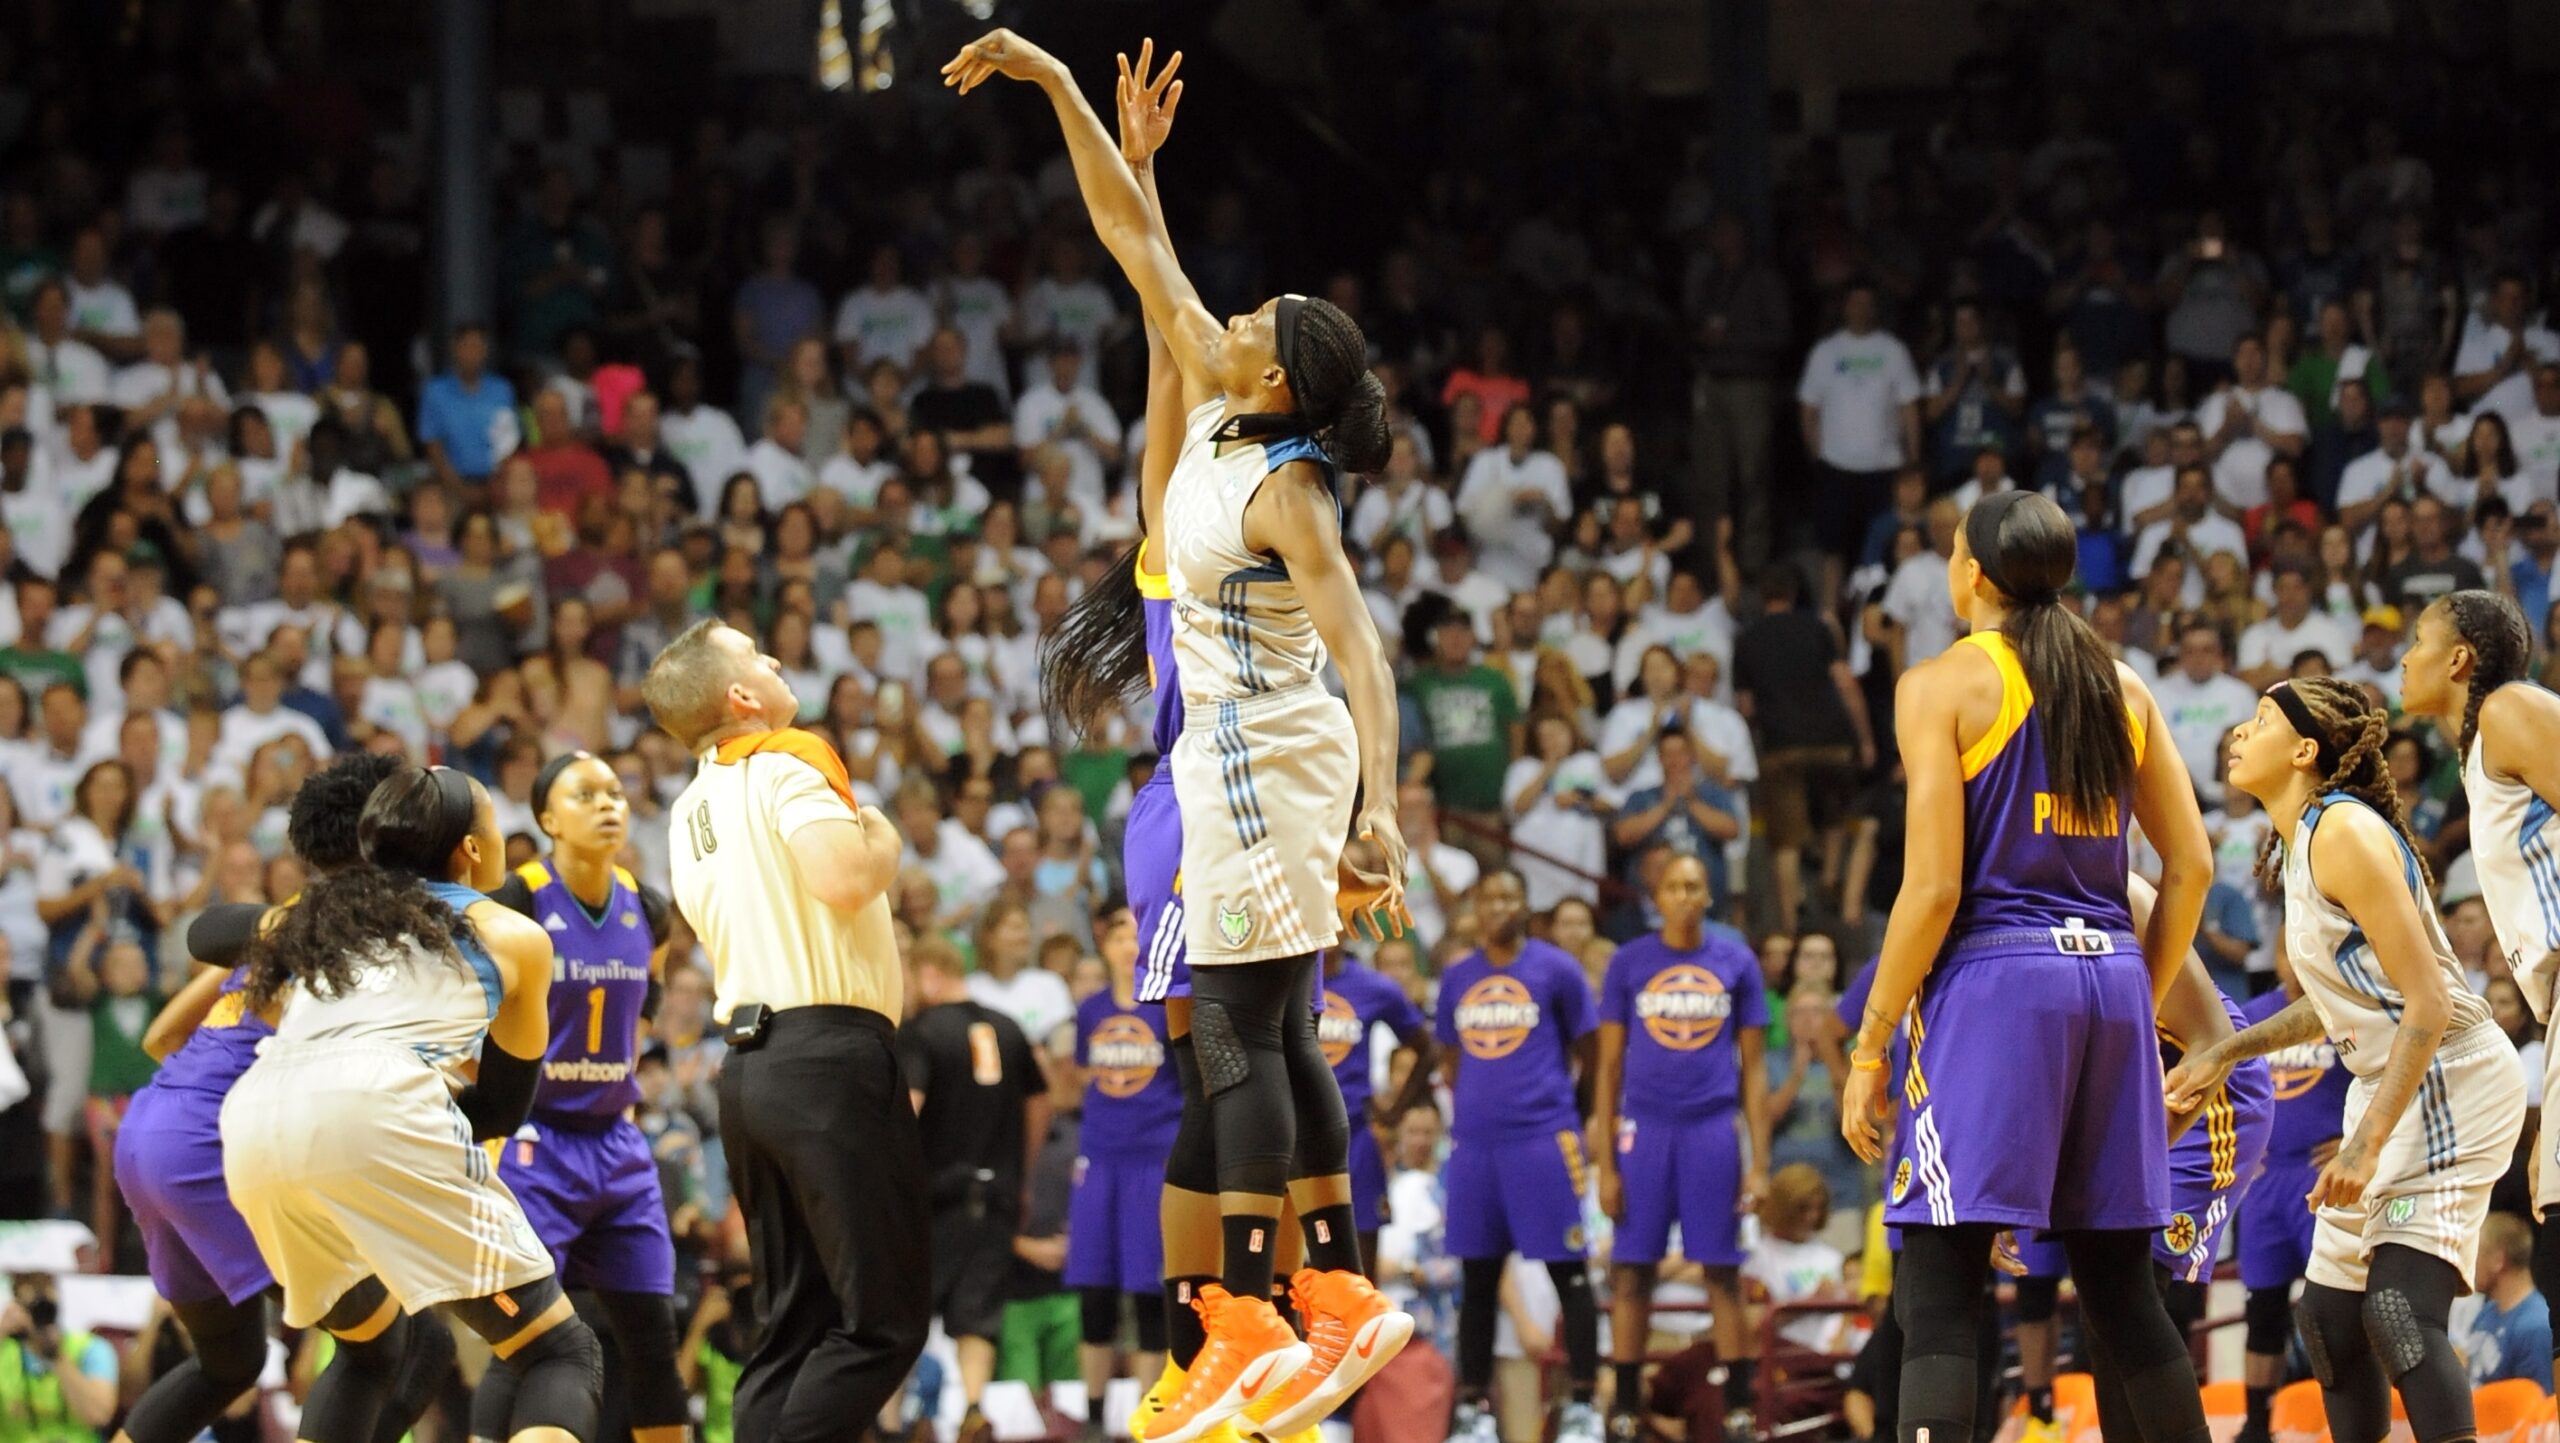 Buzzer-beater WNBA Finals game 1 delivers best overnight ratings ever